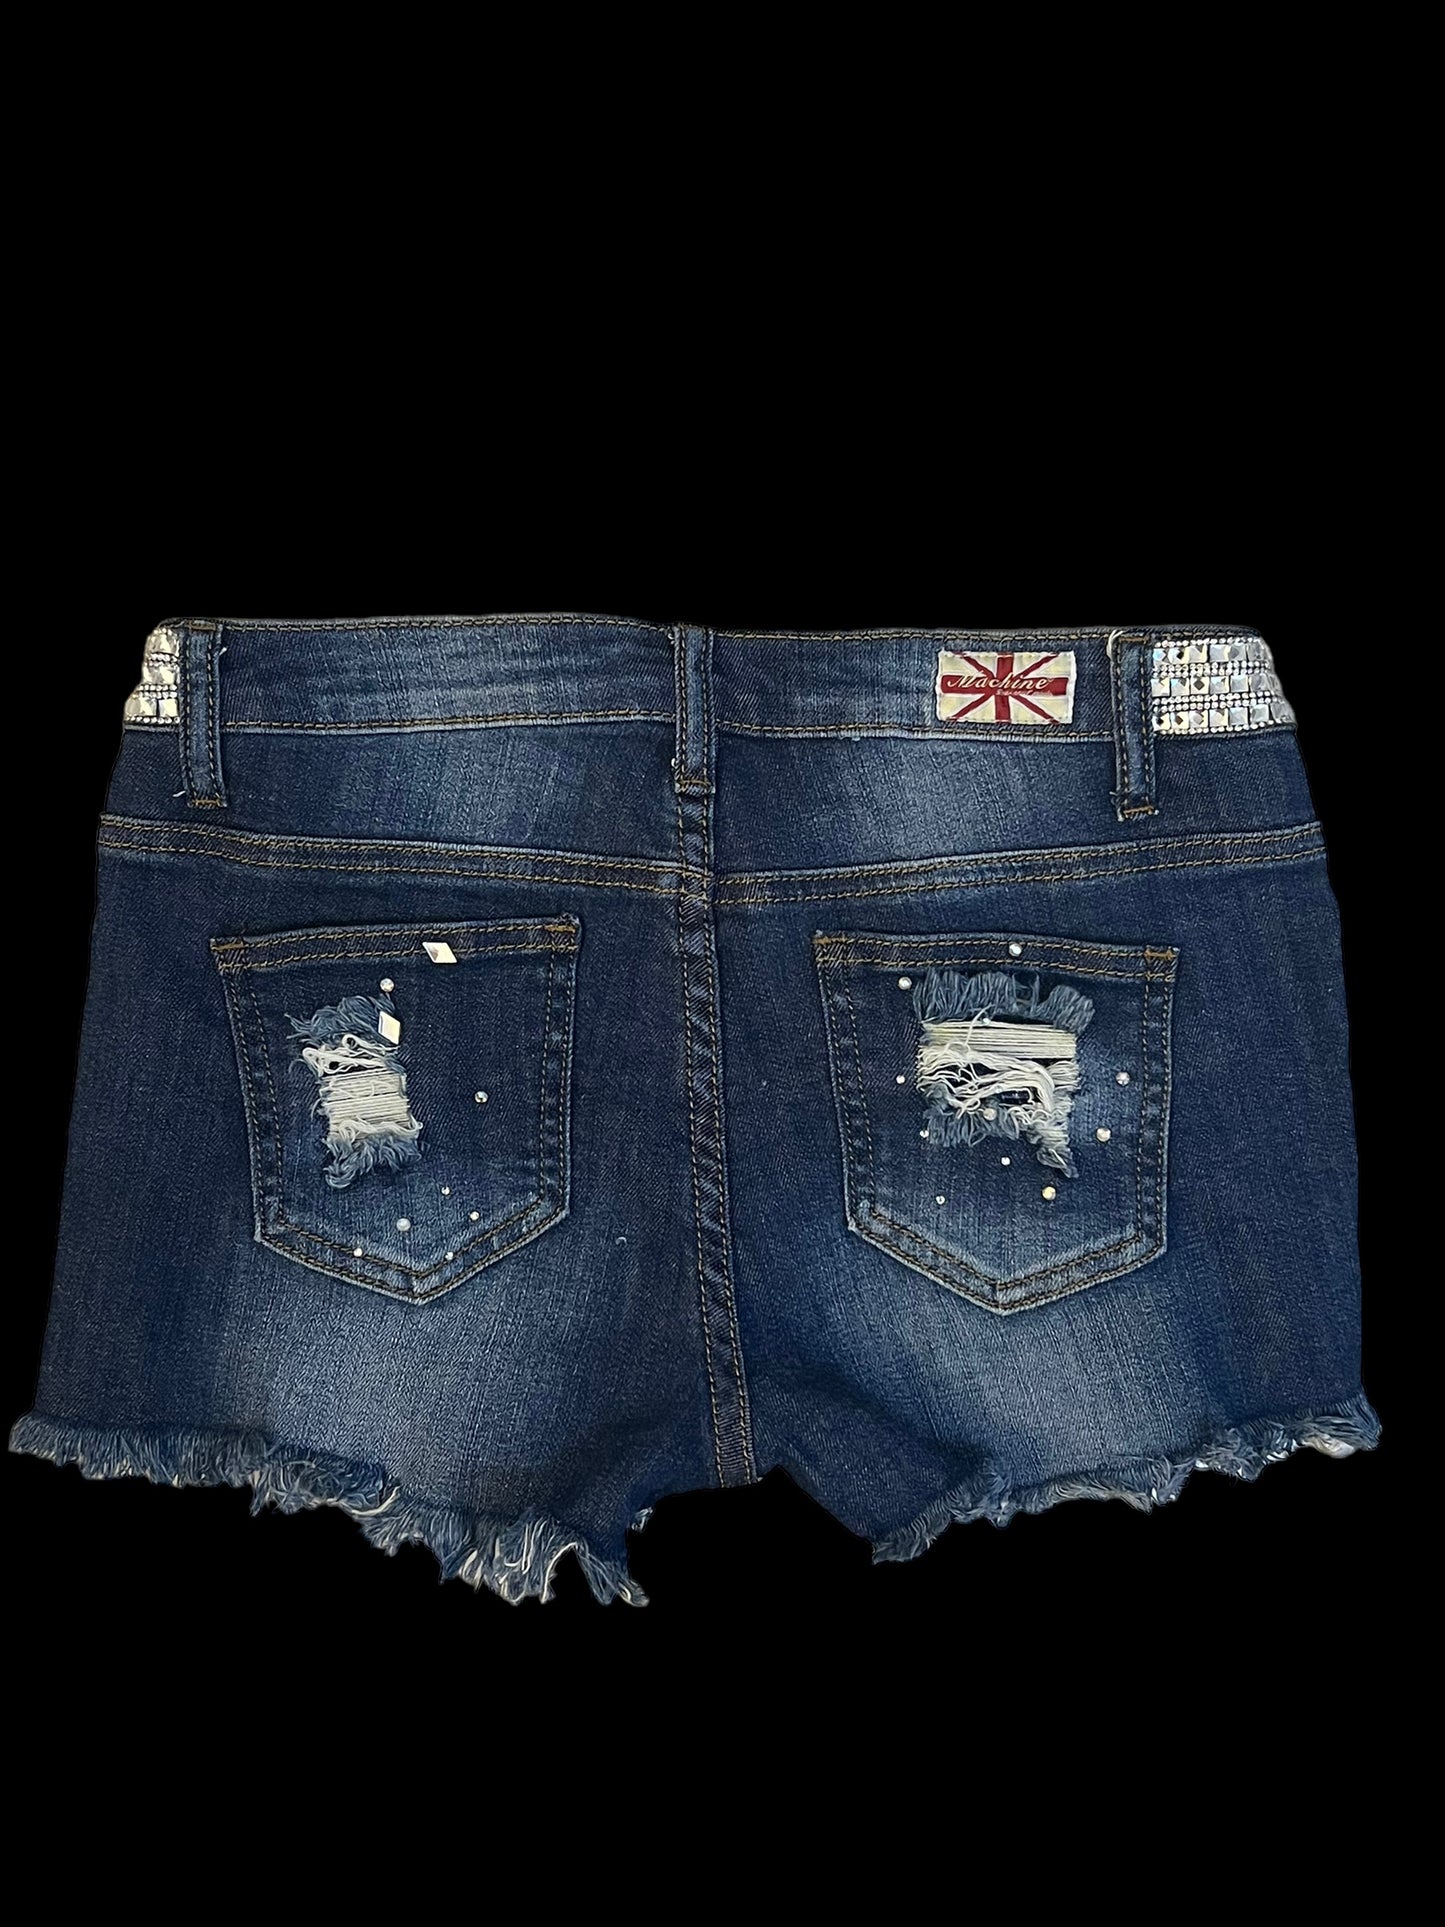 Bedazzled jean shorts